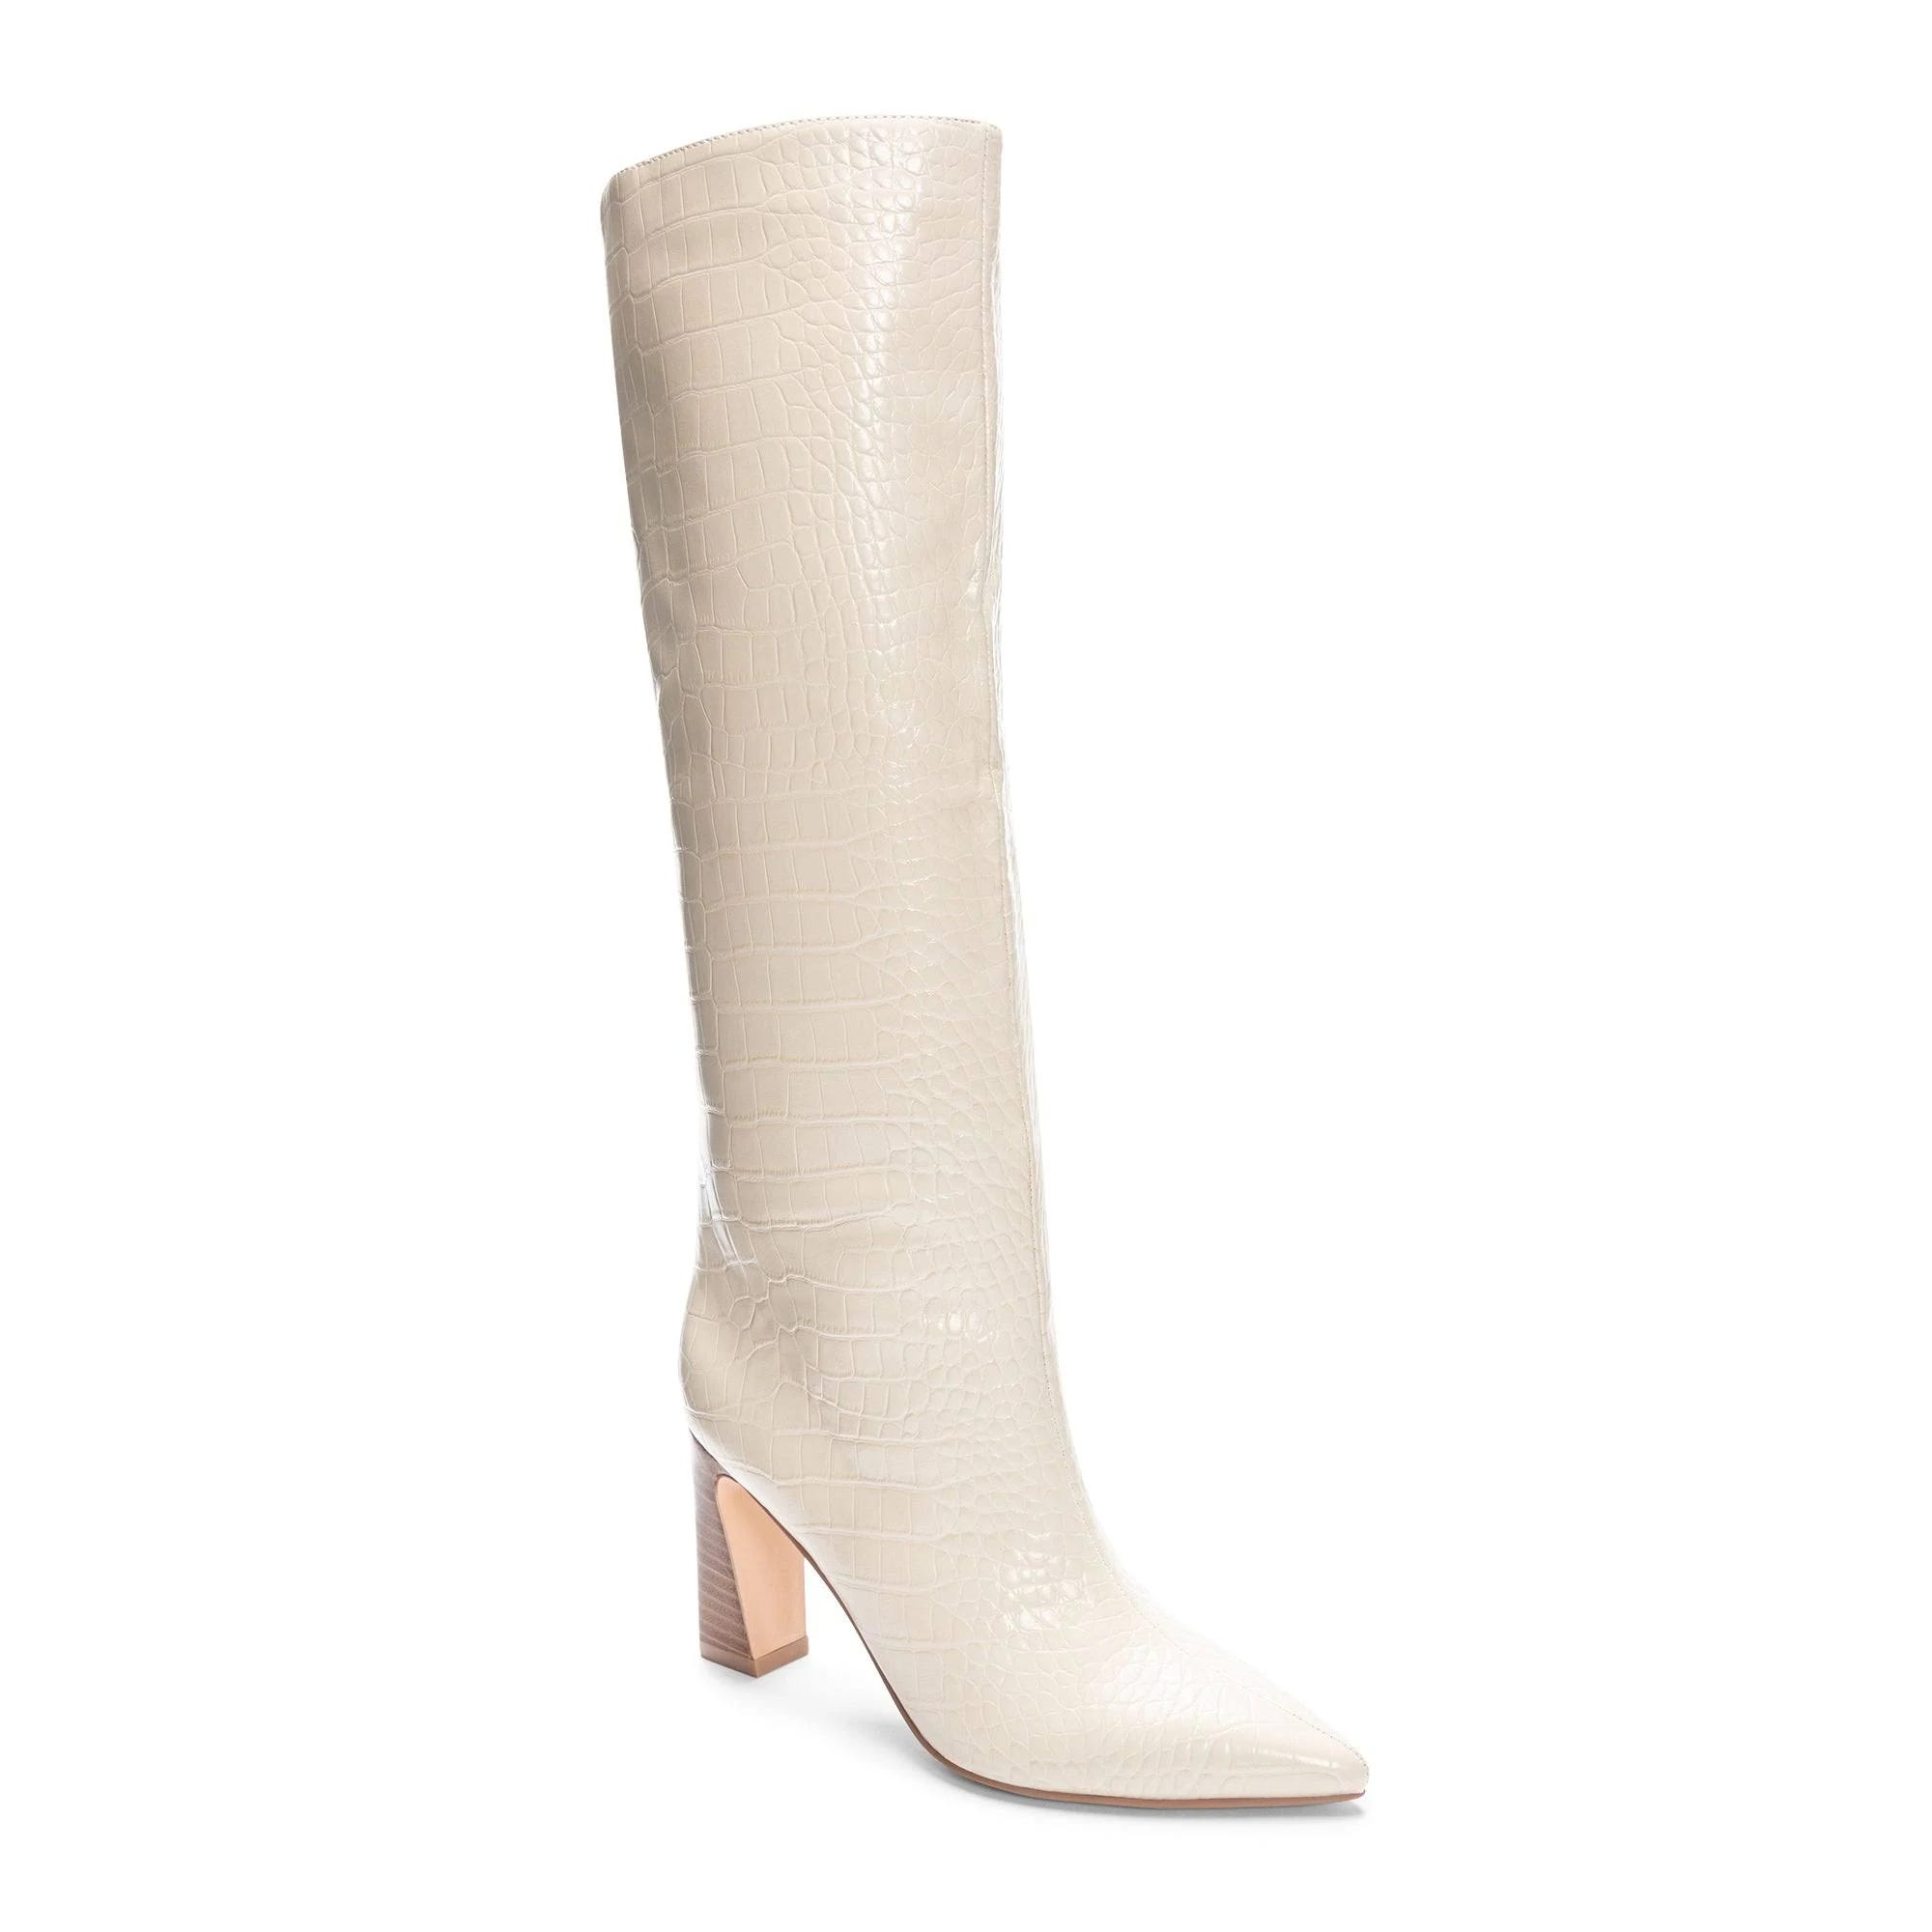 Affordable Croco Embossed Cream Knee High Boots | Image